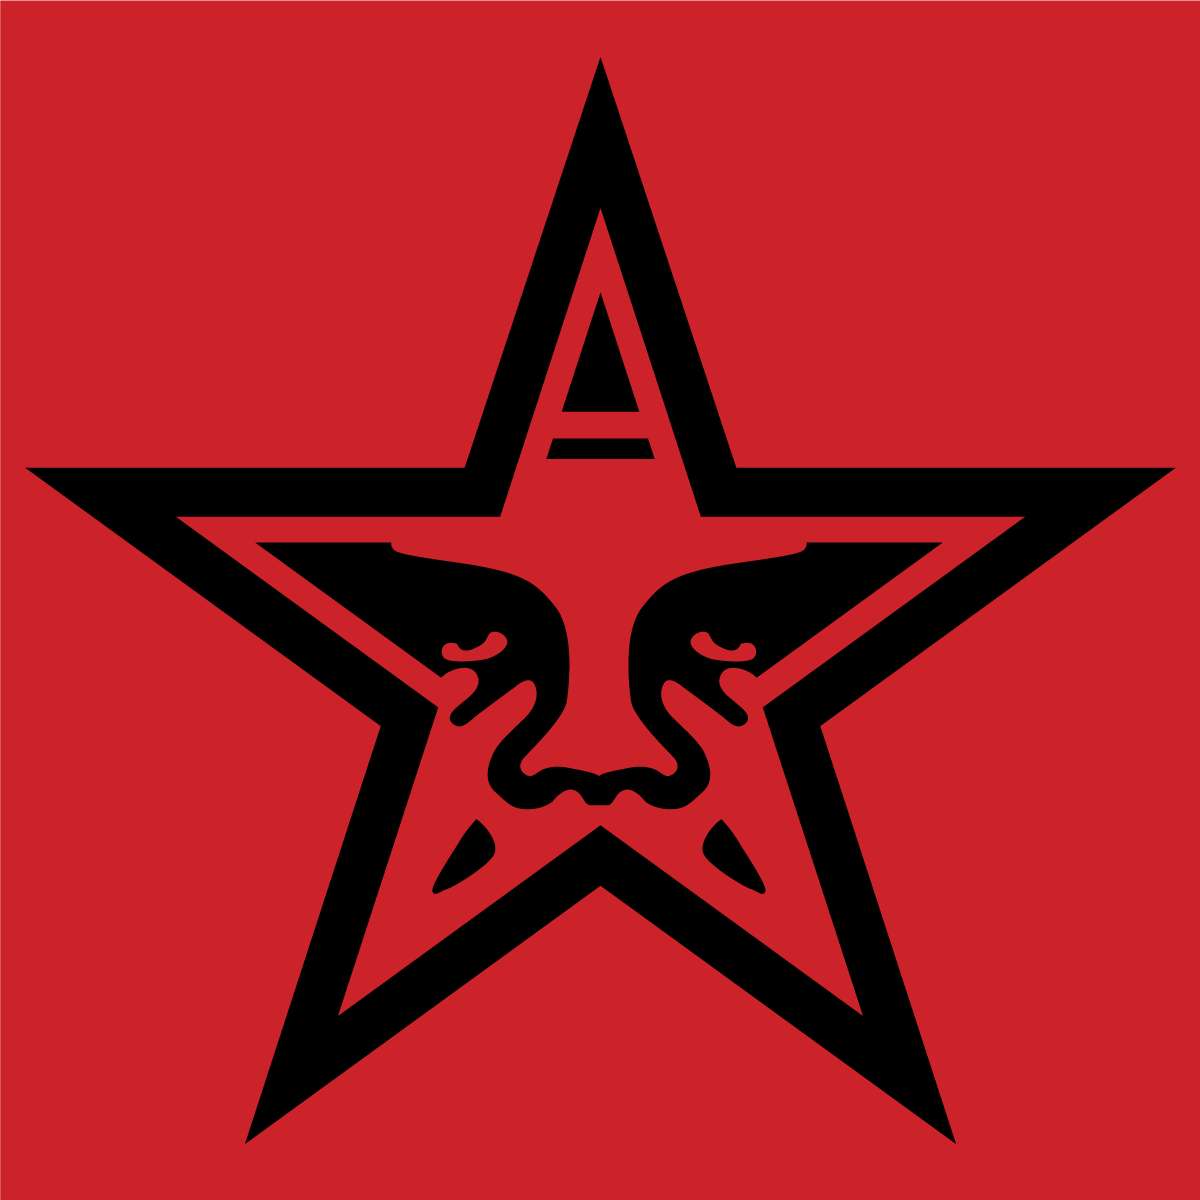 Obey GFX Logo - Obey Giant Star Logo Red Background Vector | Free Vector Silhouette ...